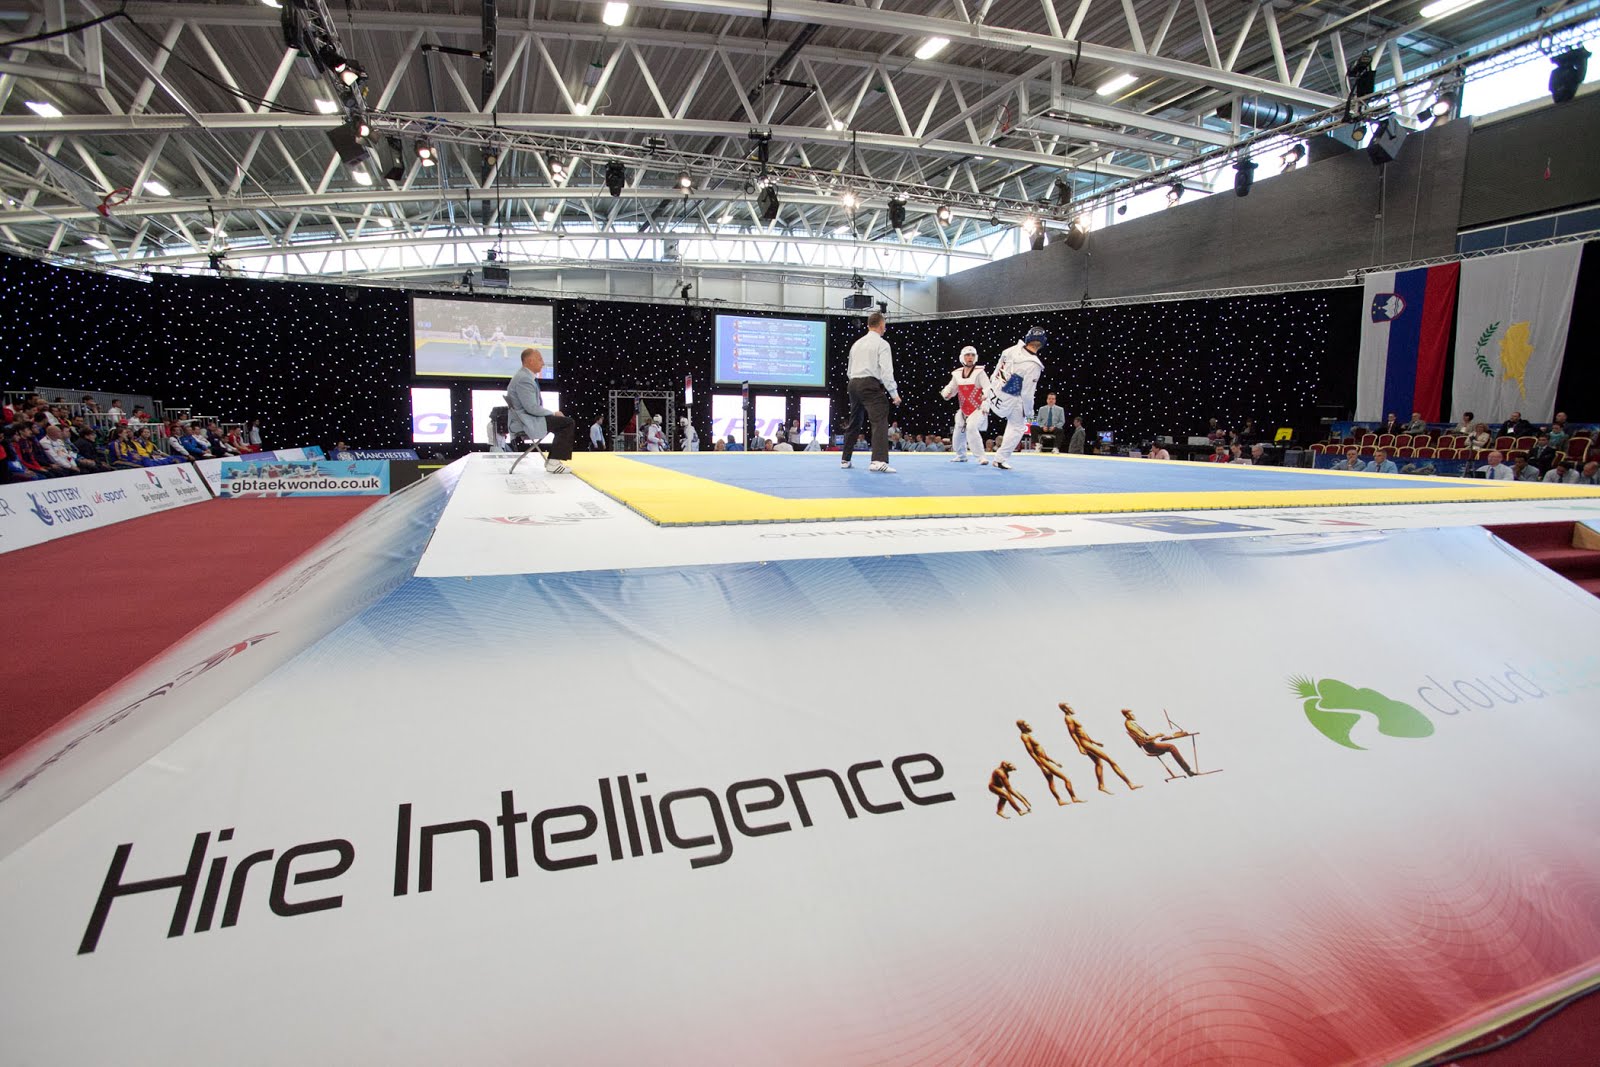 Hire Intelligence will remain as official technology rental partner for British Taekwondo for a second year with the responsibility of supplying information technology and audio visual equipment for live events.